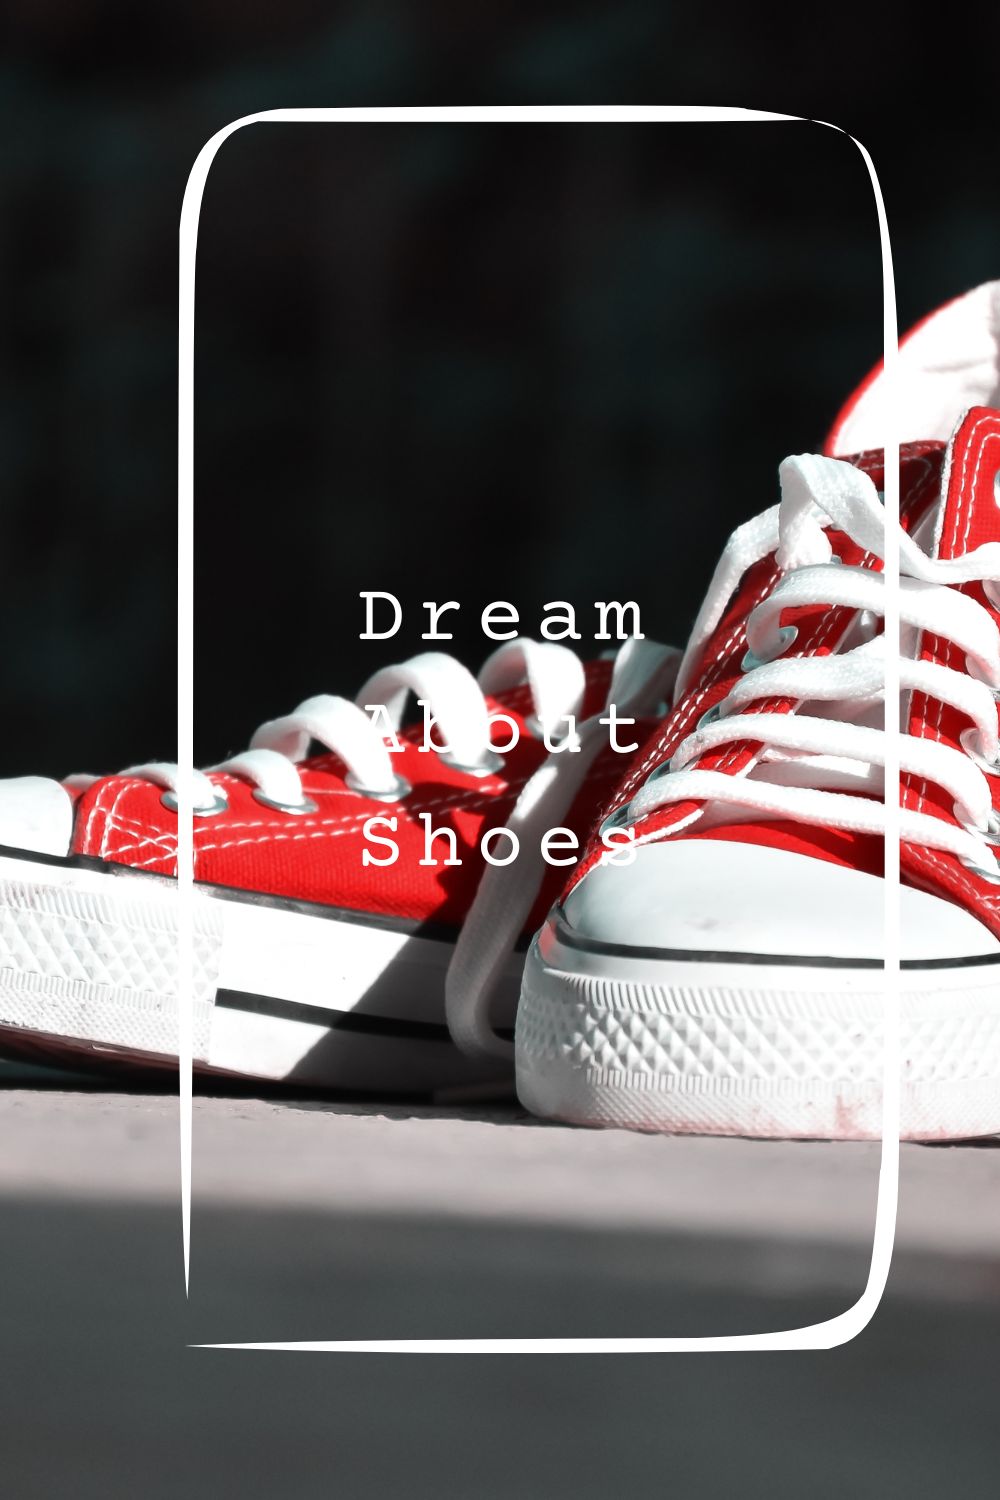 10 Dream About Shoes Meanings pin 1